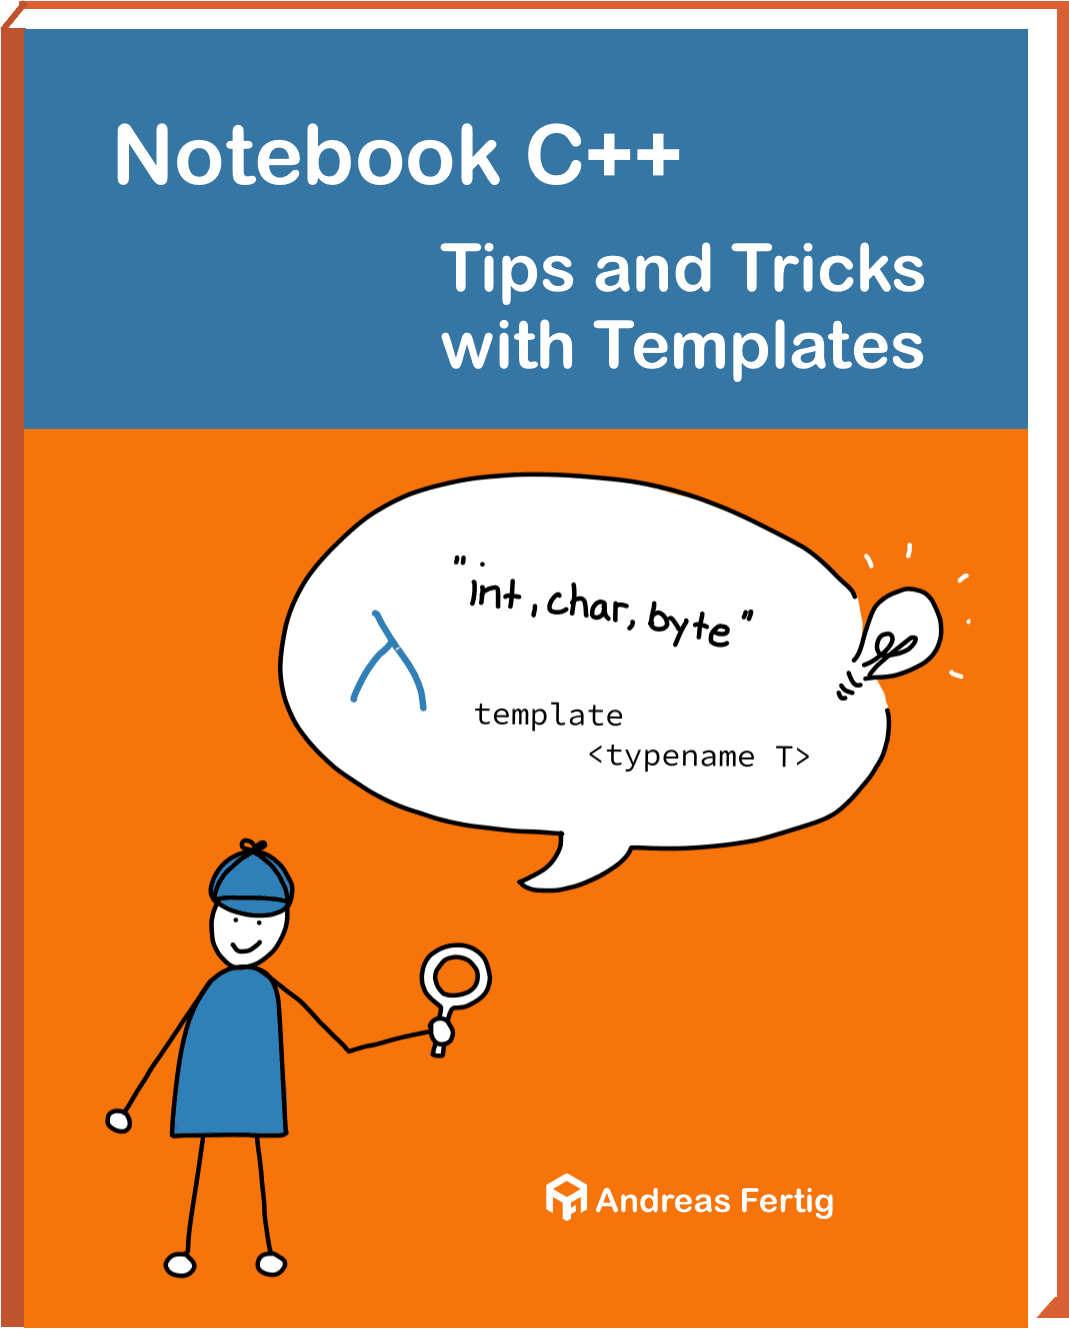 Notebook C++: Tips and Tricks with Templates